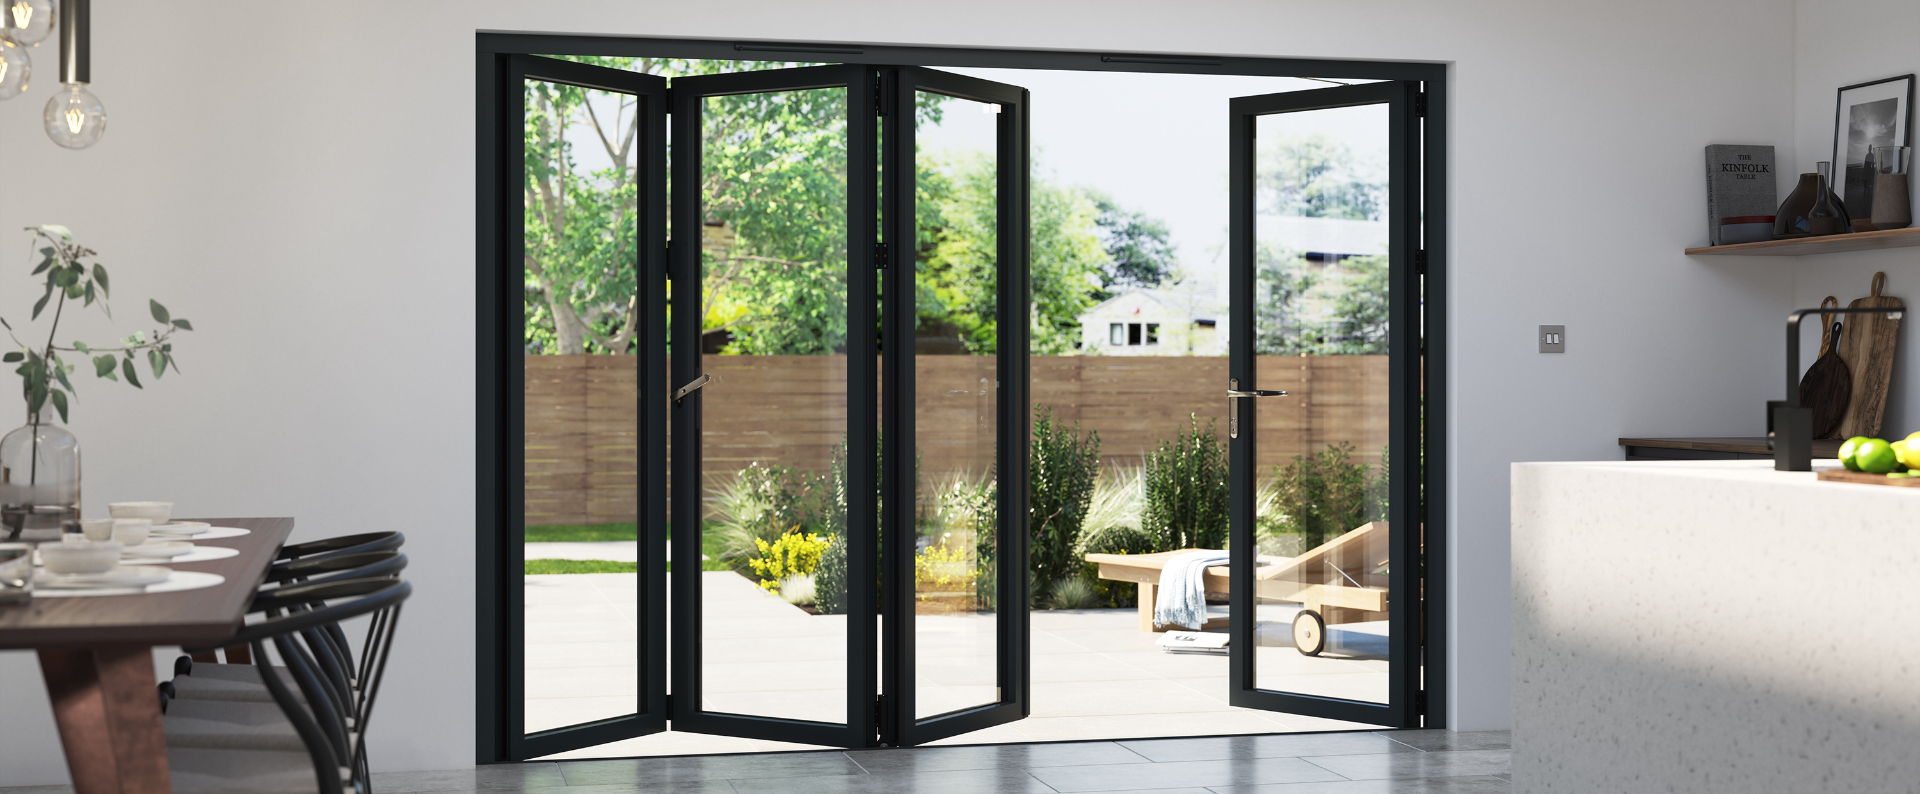 Bifold Door Supplier: Why Choosing the Right One Matters